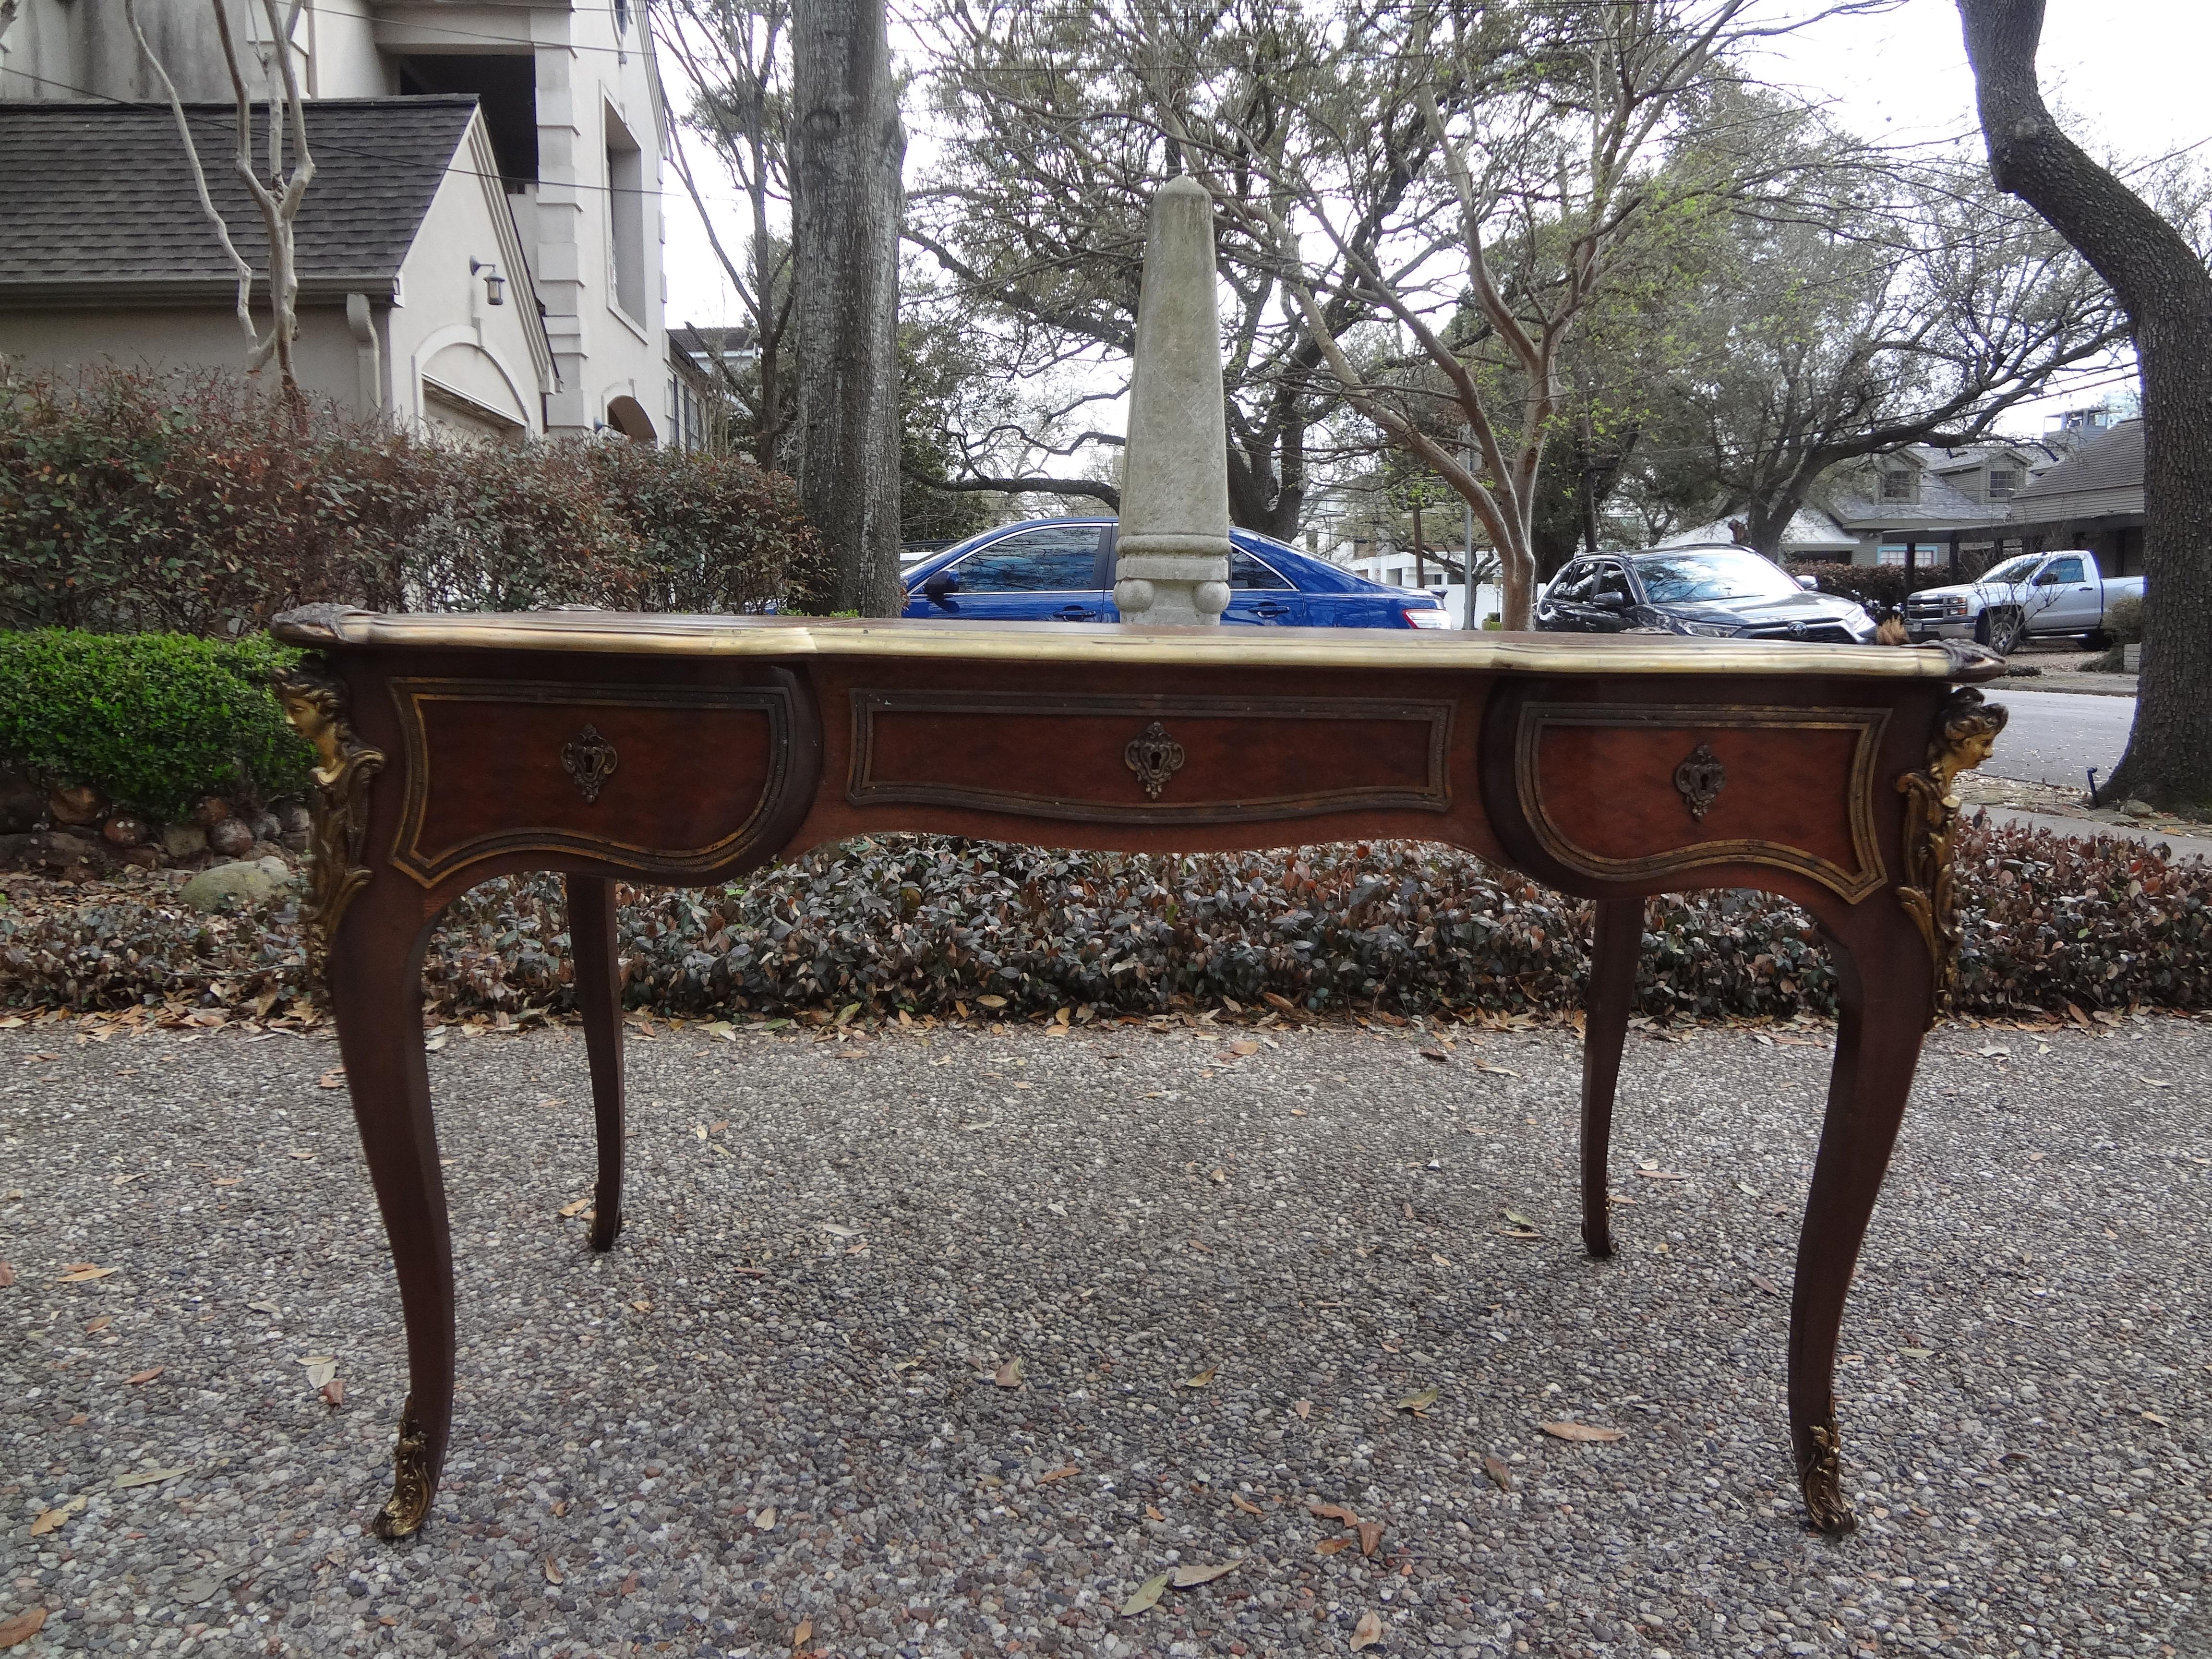 Stunning 19th century French Louis XV style desk- bureau plat. This beautiful 19th century French Napoleon III kingwood desk, writing table, or bureau plat is finely detailed with the original brown gilt embossed leather top and three drawers,